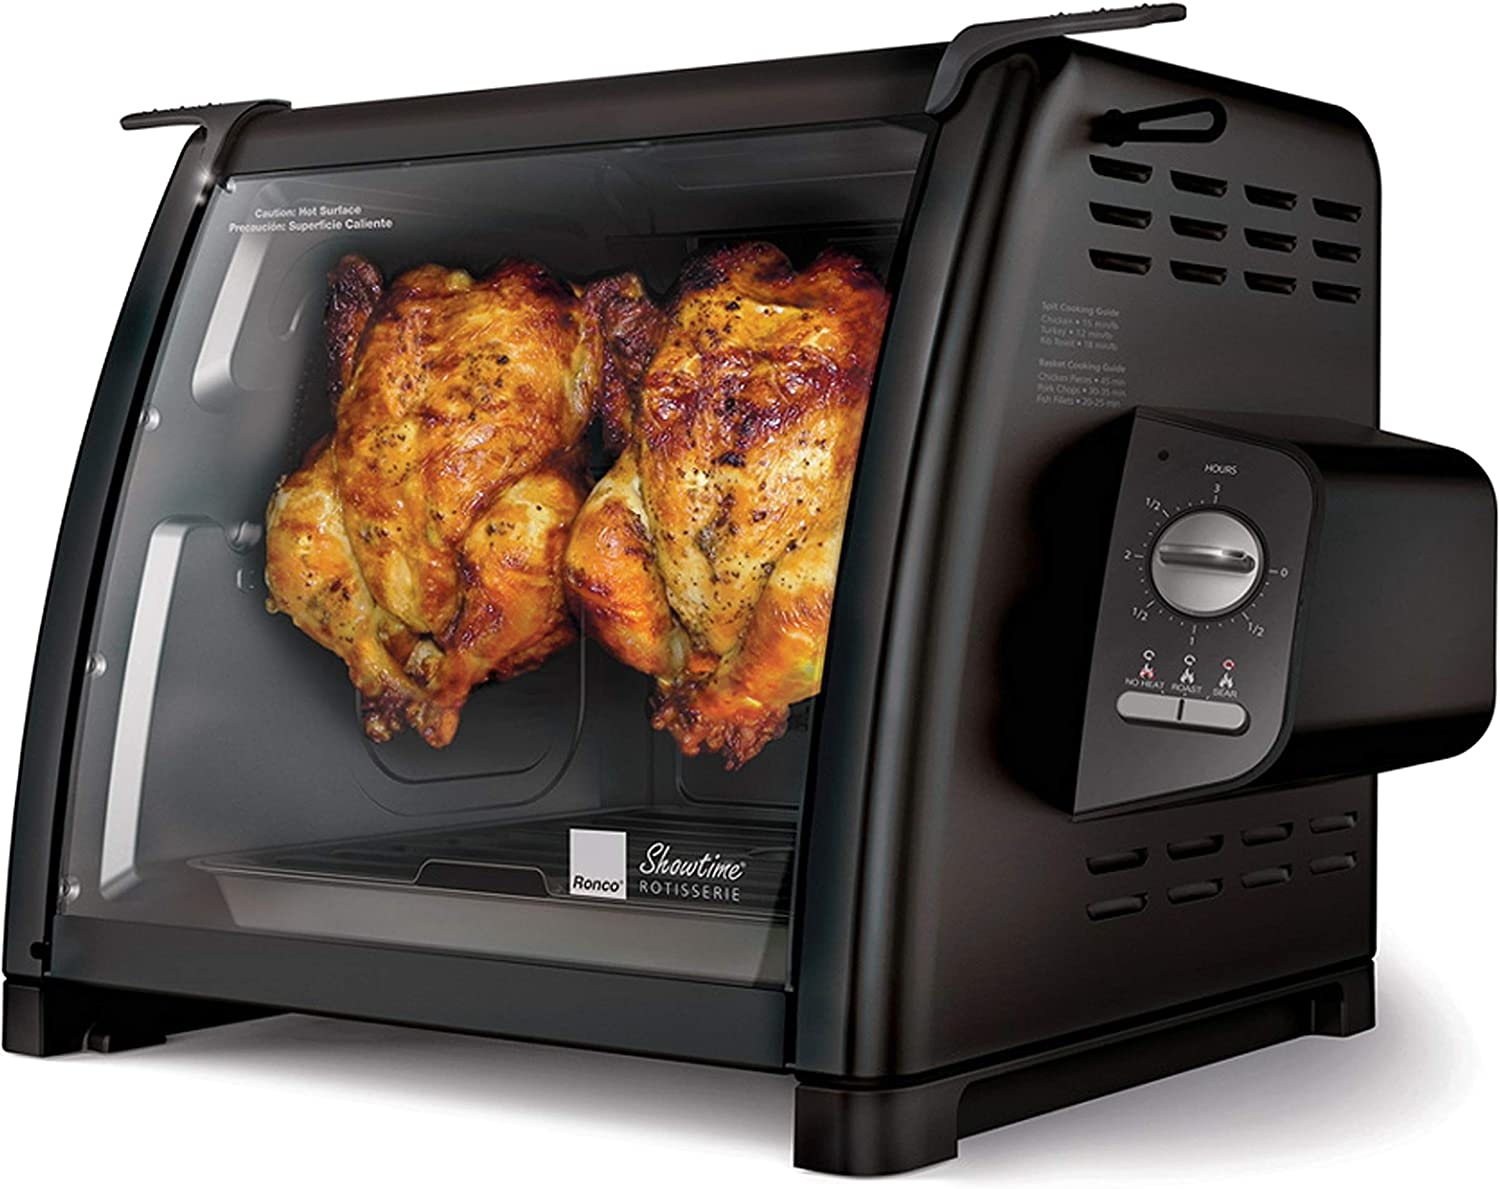 Ronco ST5500SBLK Series Rotisserie Oven, Countertop Rotisserie Oven, 3 Cooking Functions: Rotisserie, Sear and No Heat Rotation,